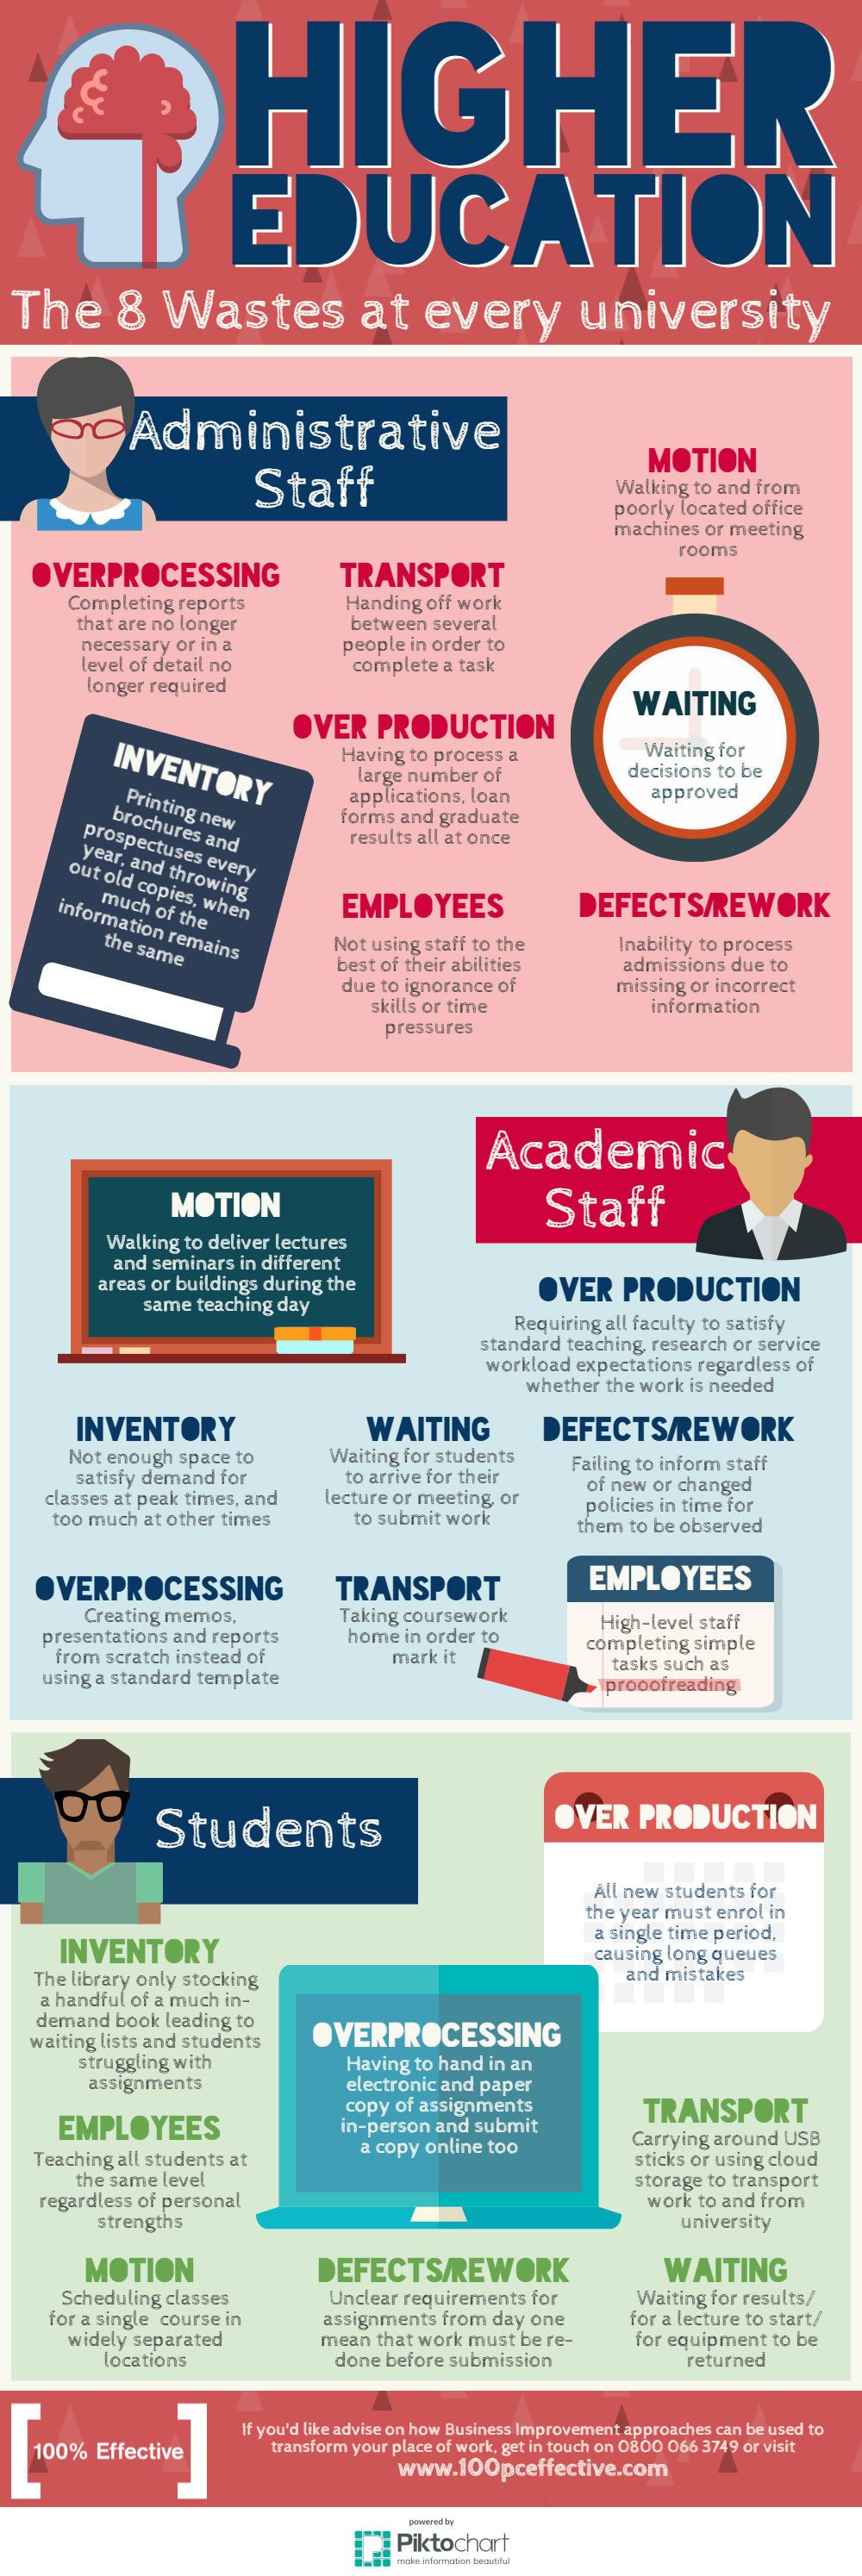 The 8 Wastes in Higher Education Infographic